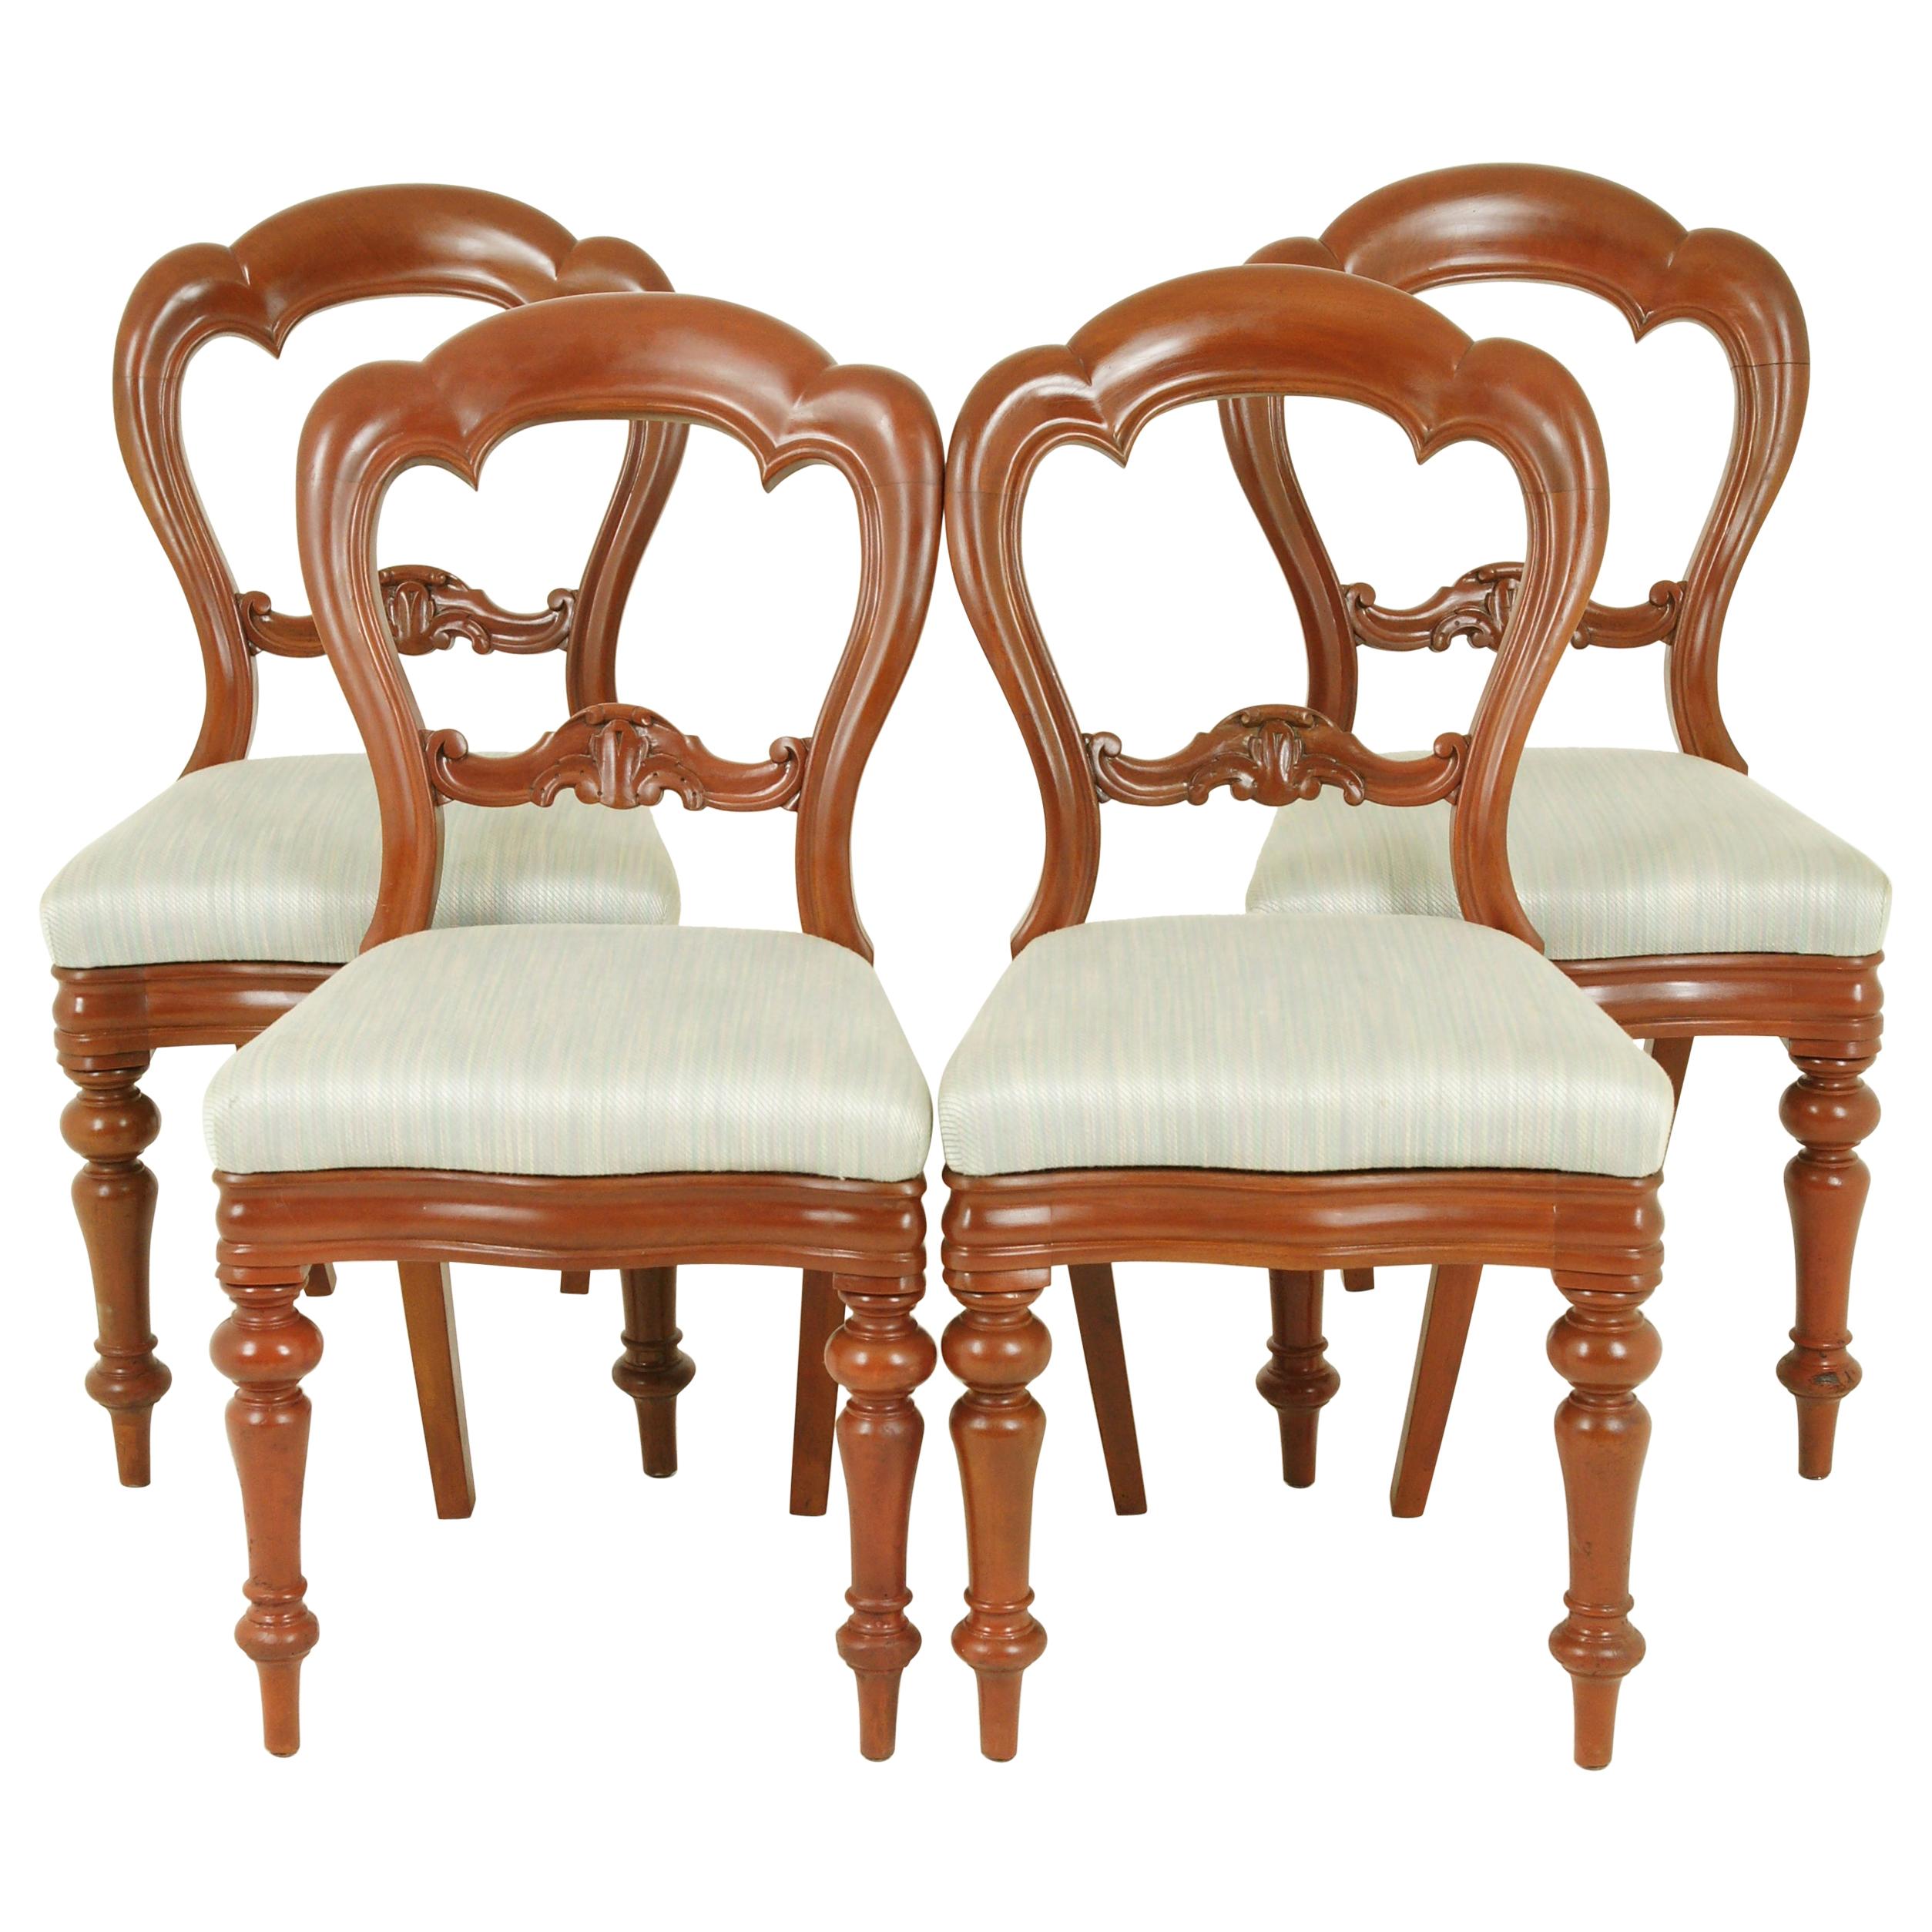 Antique Dining Chairs, Balloon Back Chairs, Walnut, Victorian, 1880, B1541